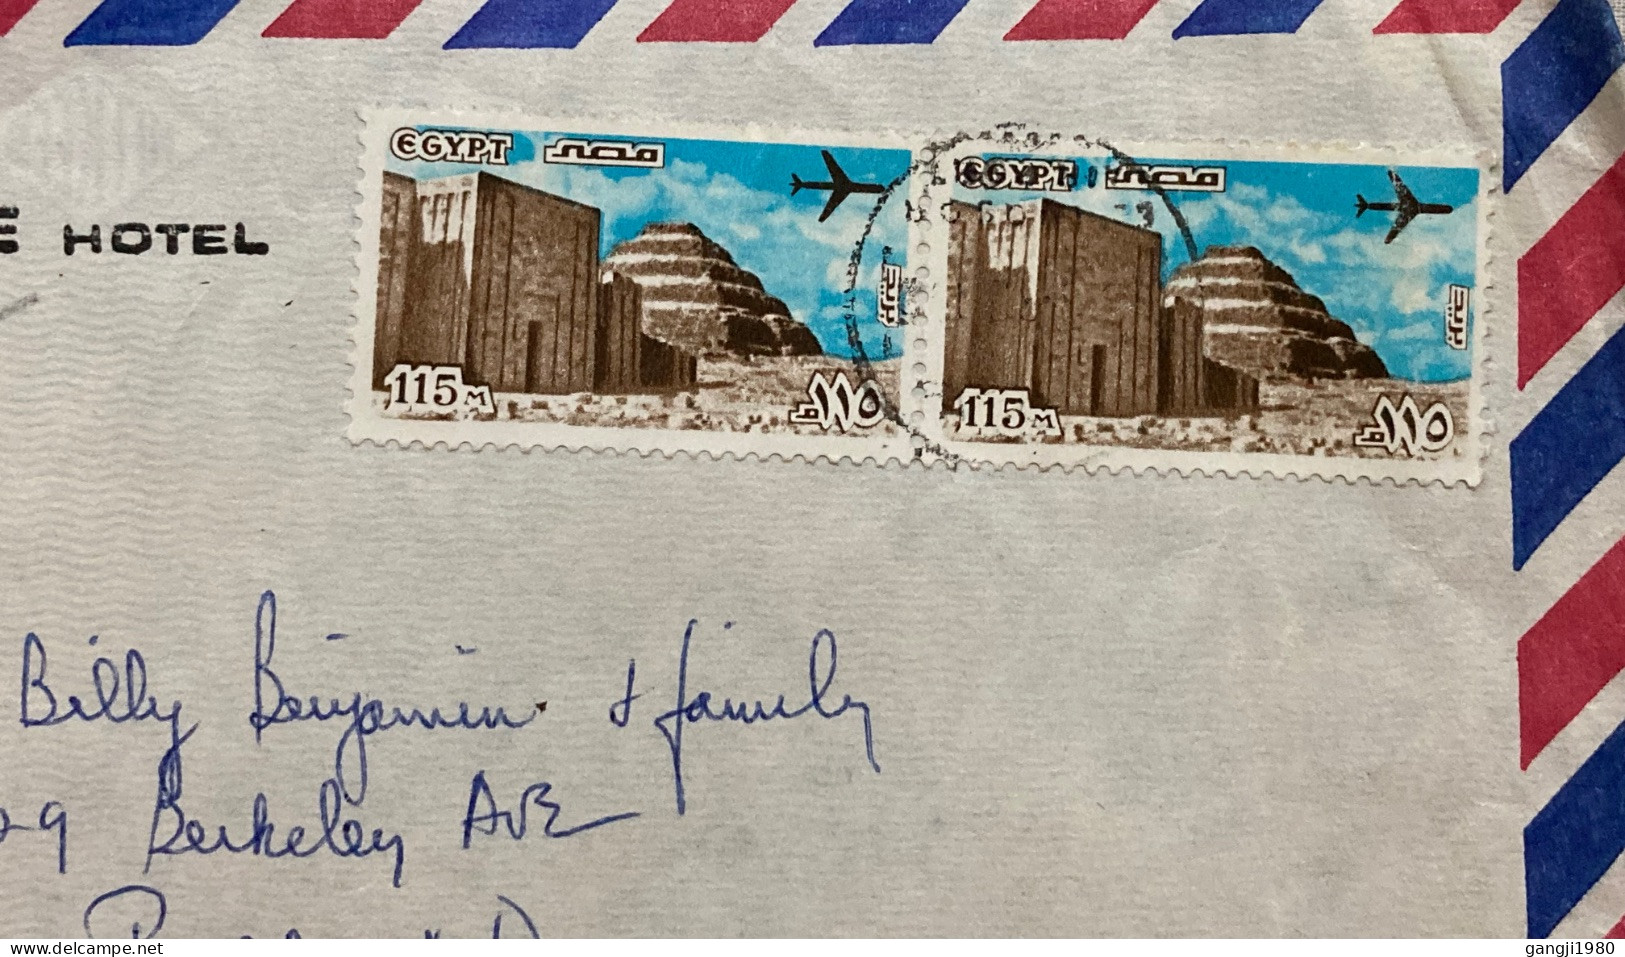 EGYPT 1980, COVER USED TO USA, NEW WINTER PALACE HOTEL, LUXOR, 2 STAMP, PYRAMID, AEROPLANE, ARCHELOGY, BUILDING, HERITAG - Brieven En Documenten